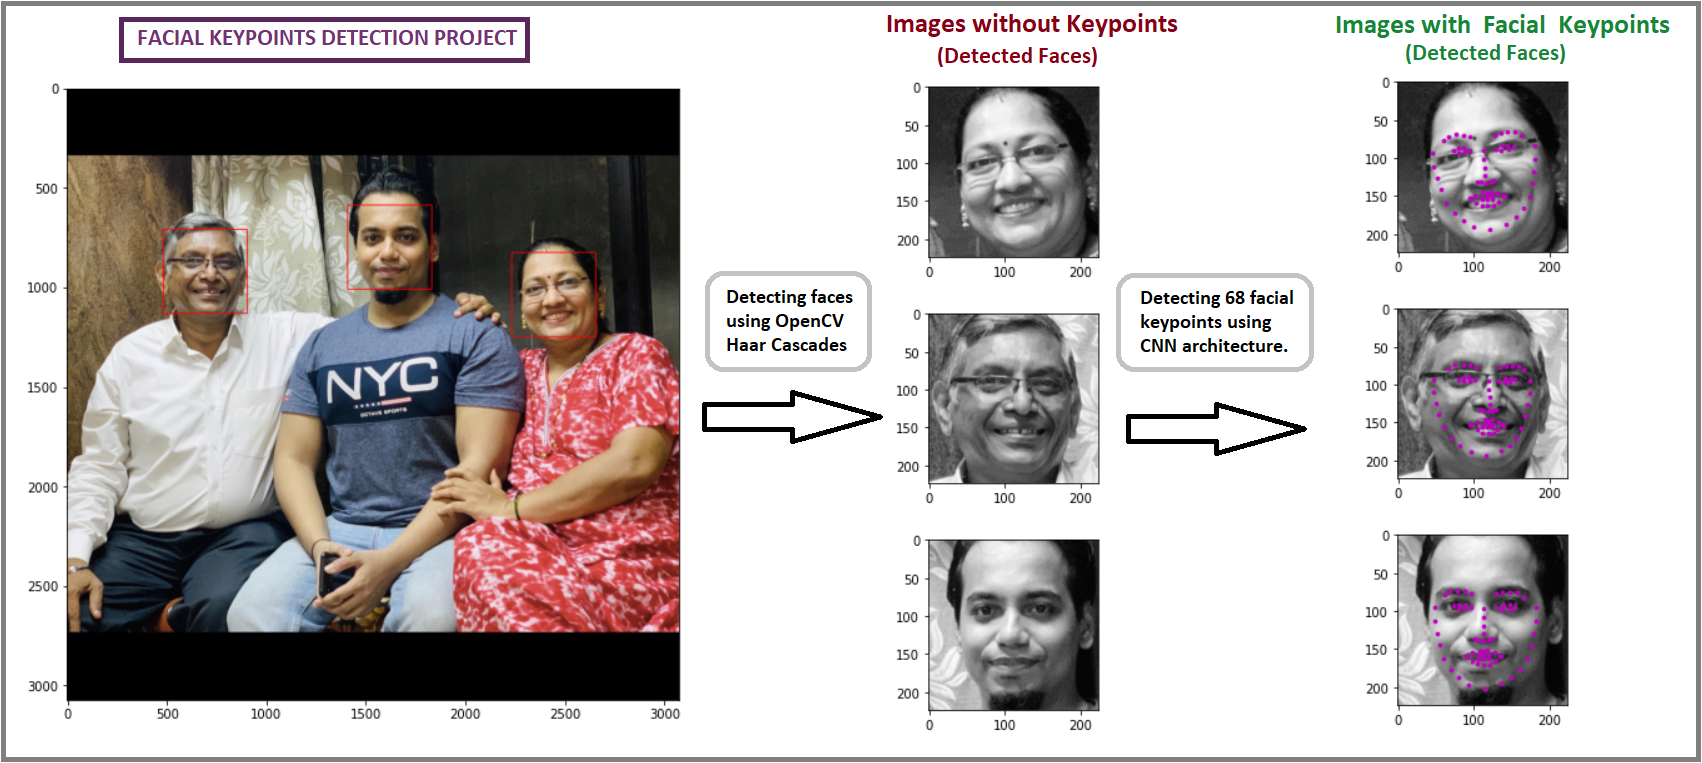 family_example_facial_keypoints_detection.png